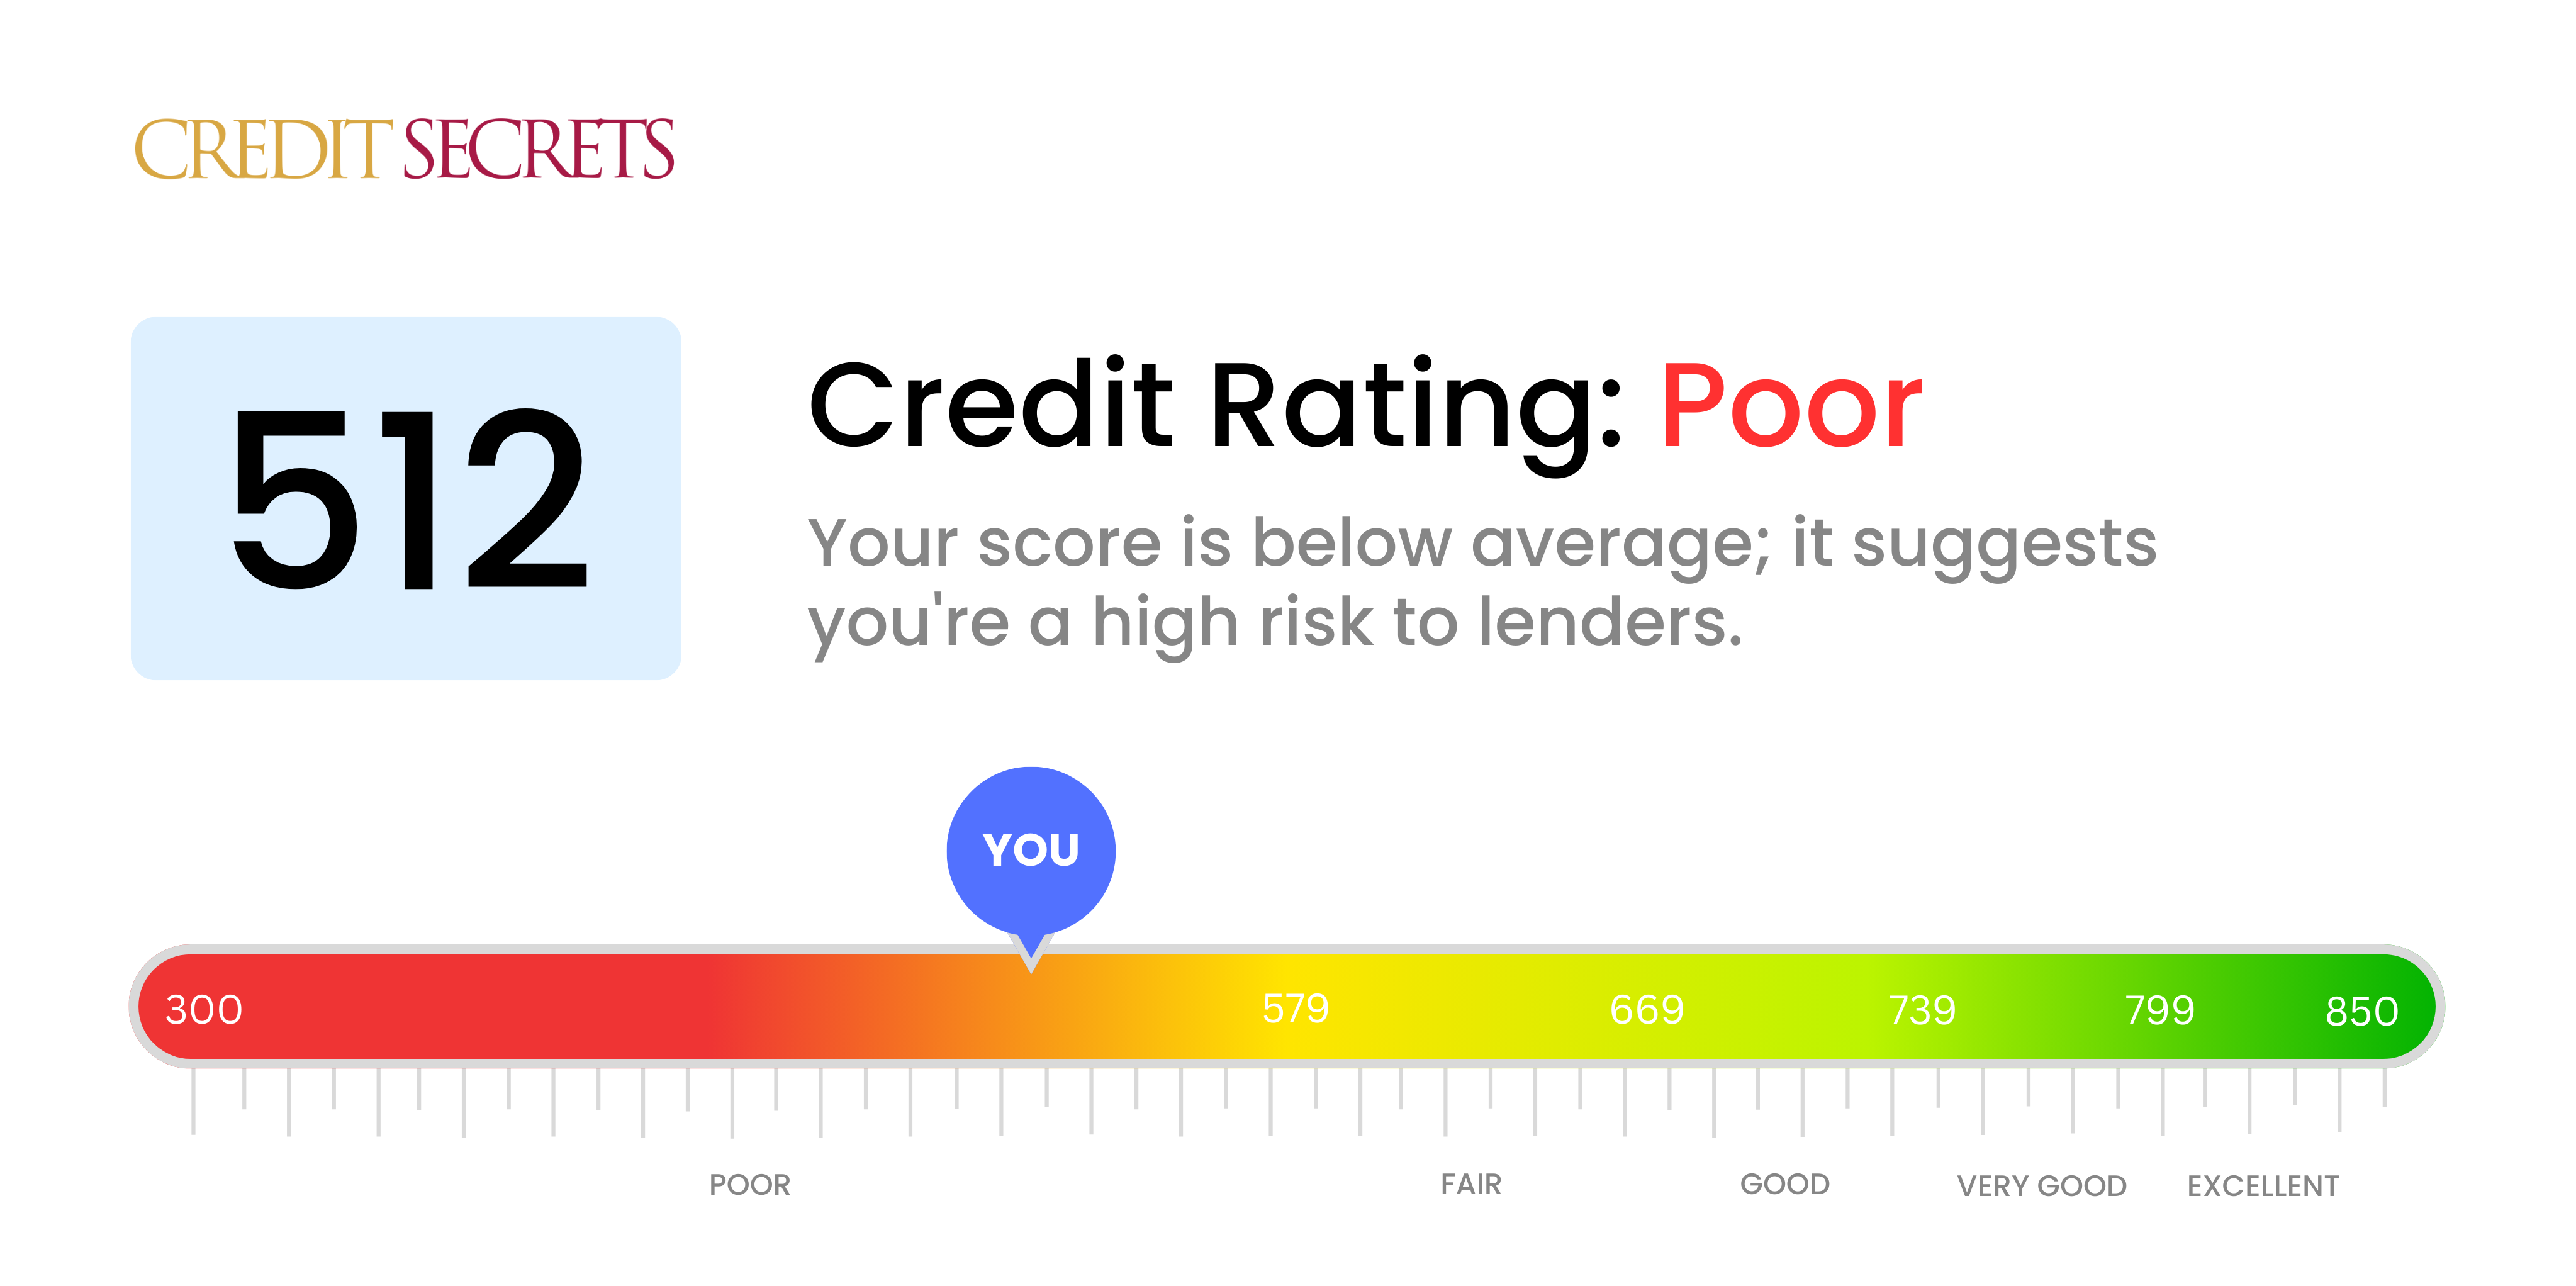 Is 512 a good credit score?